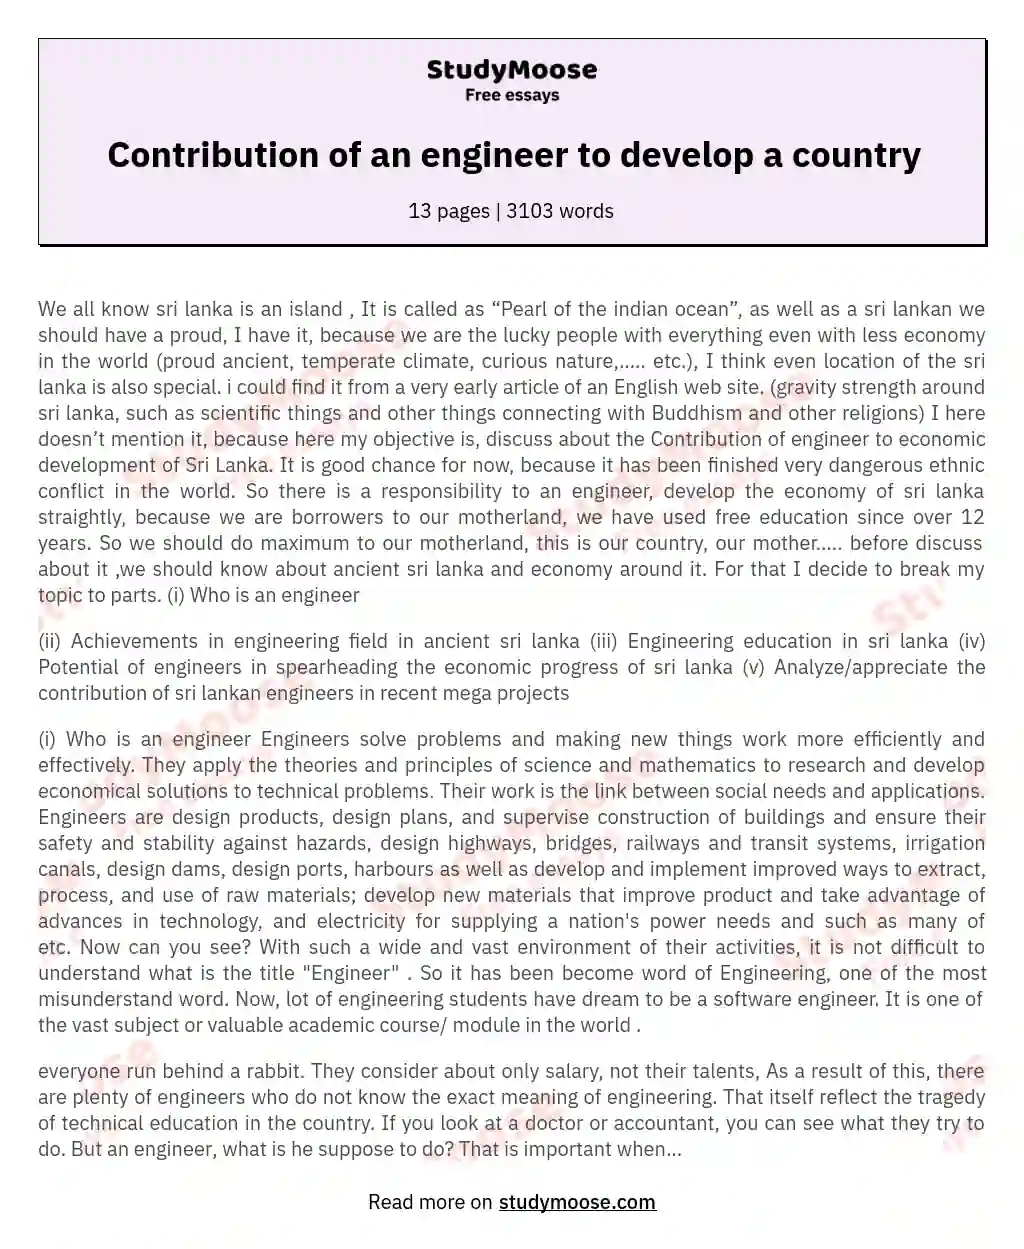 Contribution of an engineer to develop a country essay